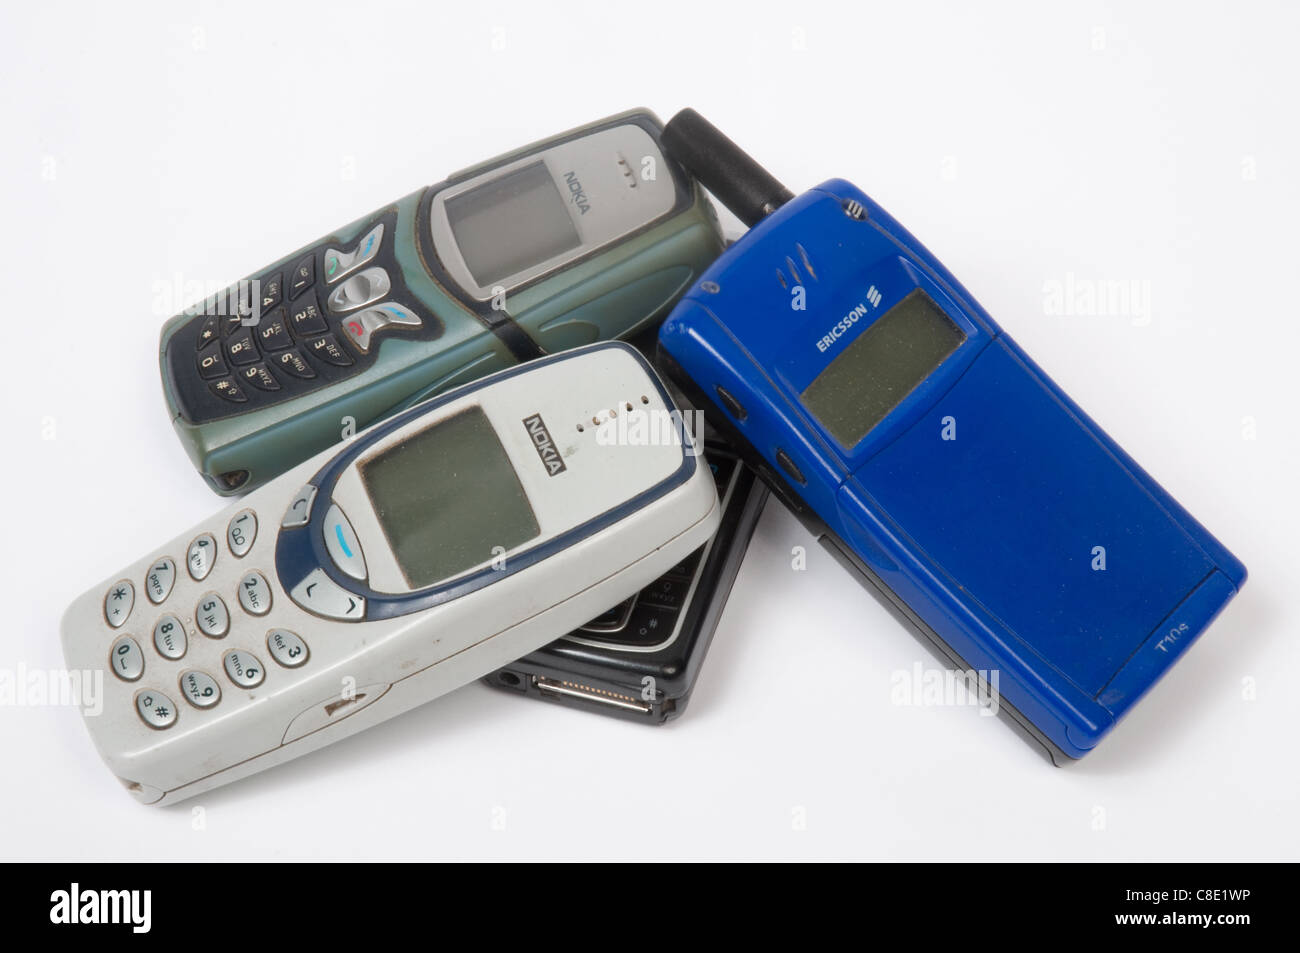 Old mobile phones Stock Photo